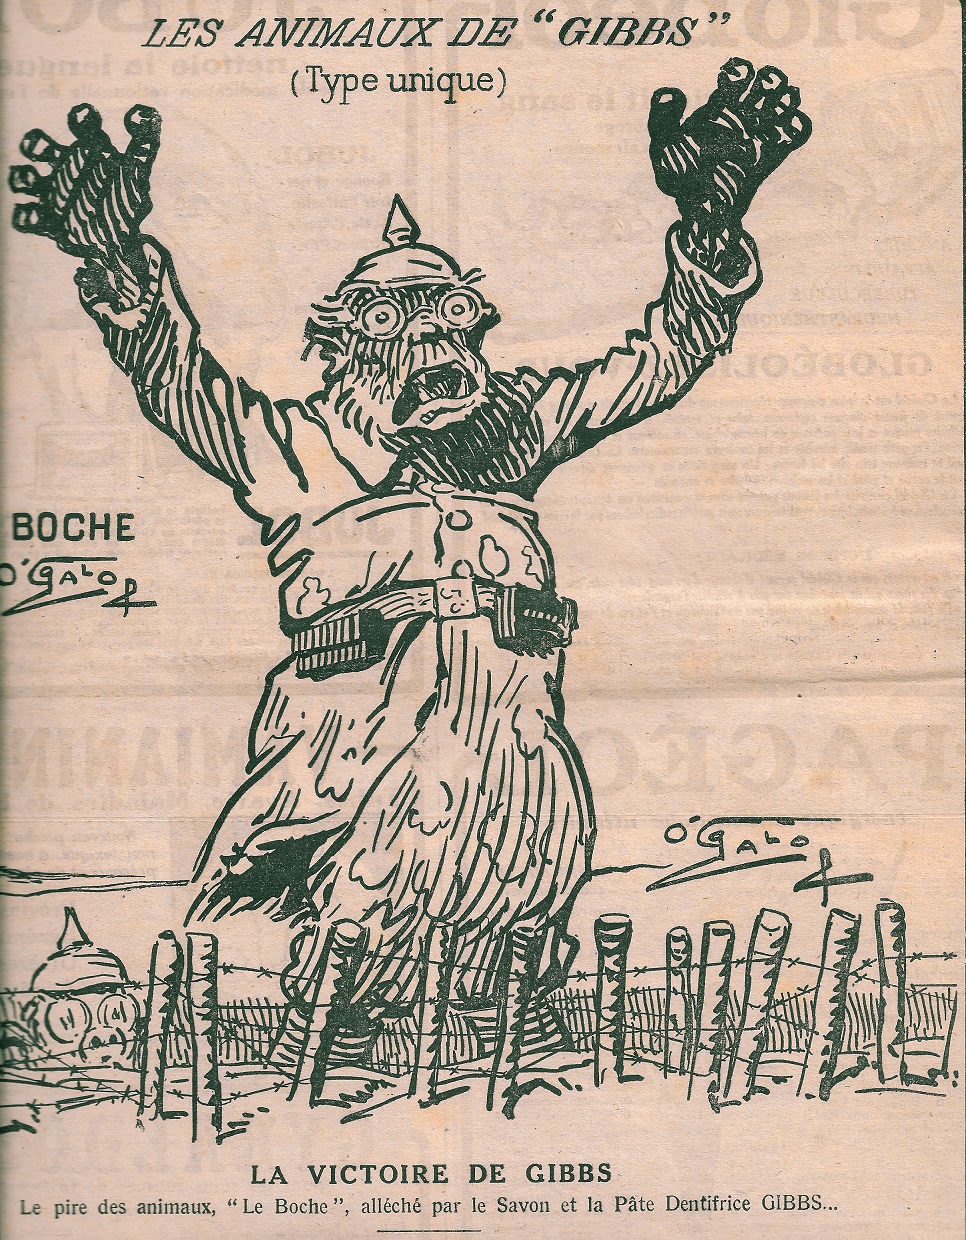 "Superb WW1 advert from the company Gibbs".  Suggests the Germans should surrender to get Gibbs toothpaste and soap. Taken by Le Pays de France 8 March 1917 Advert in paper 8 March 1917.